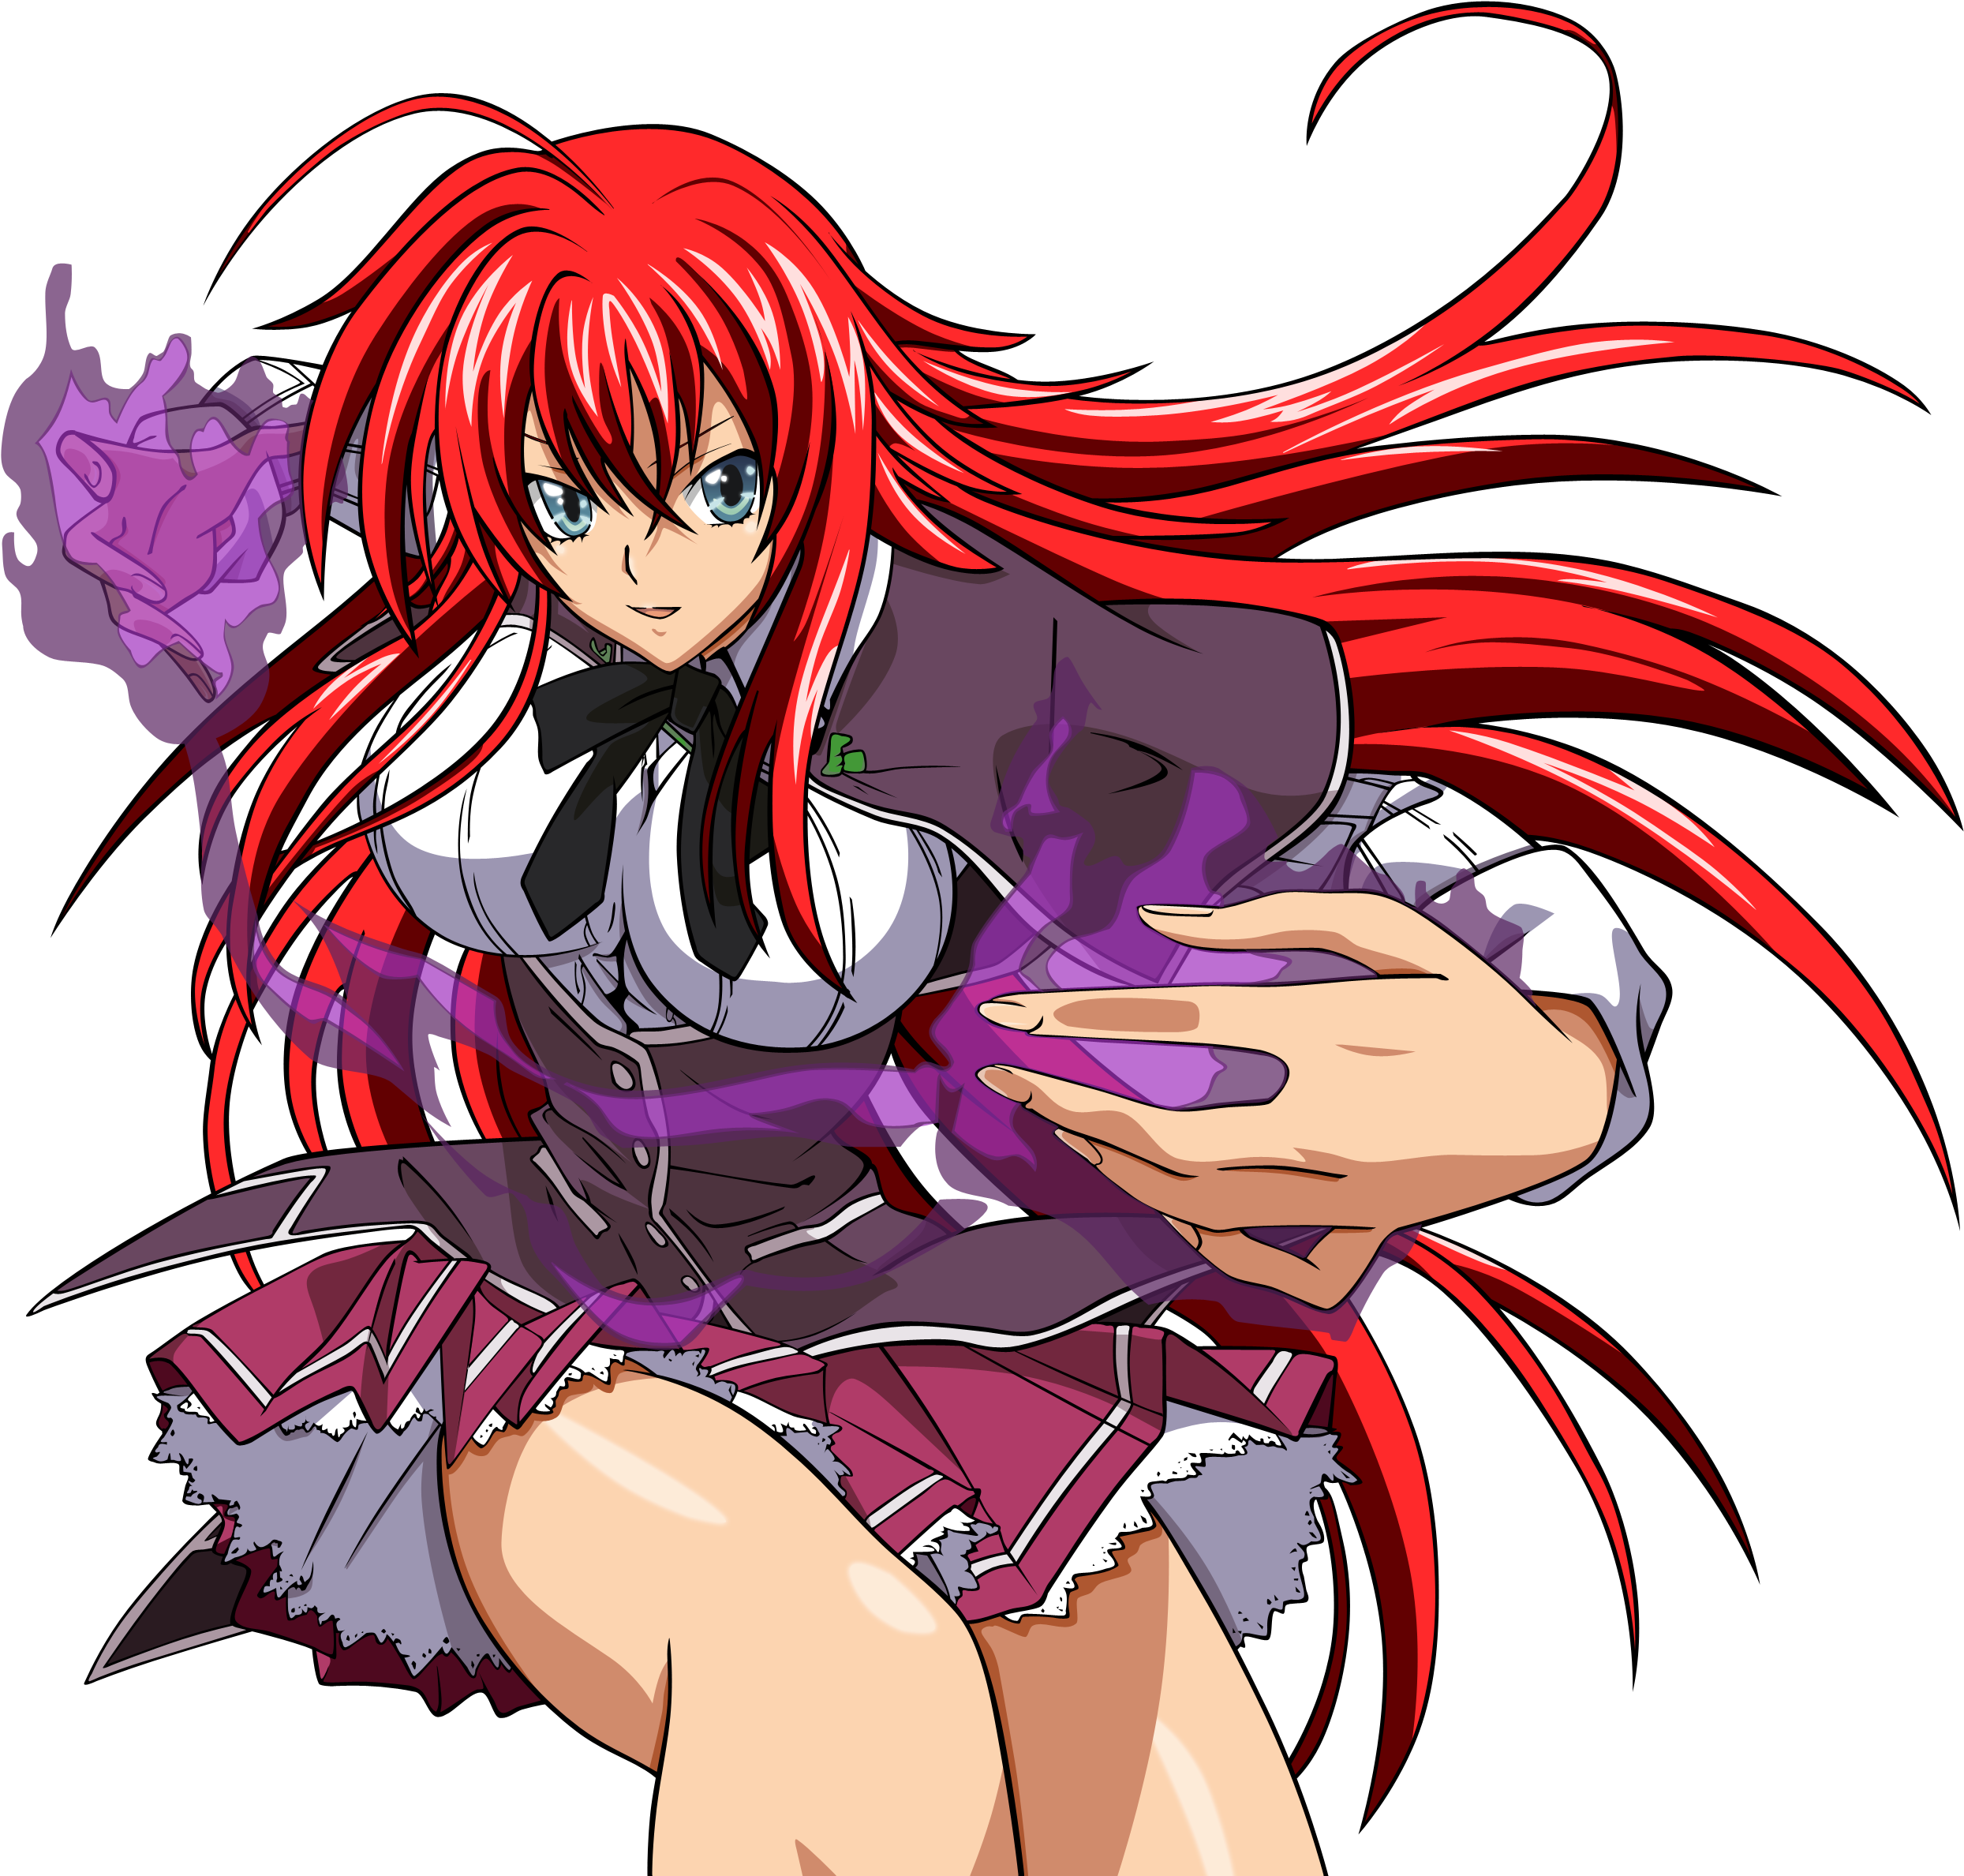 Browsing Traditional Art On Deviantart - Highschool Dxd Rias Png (2500x2500)